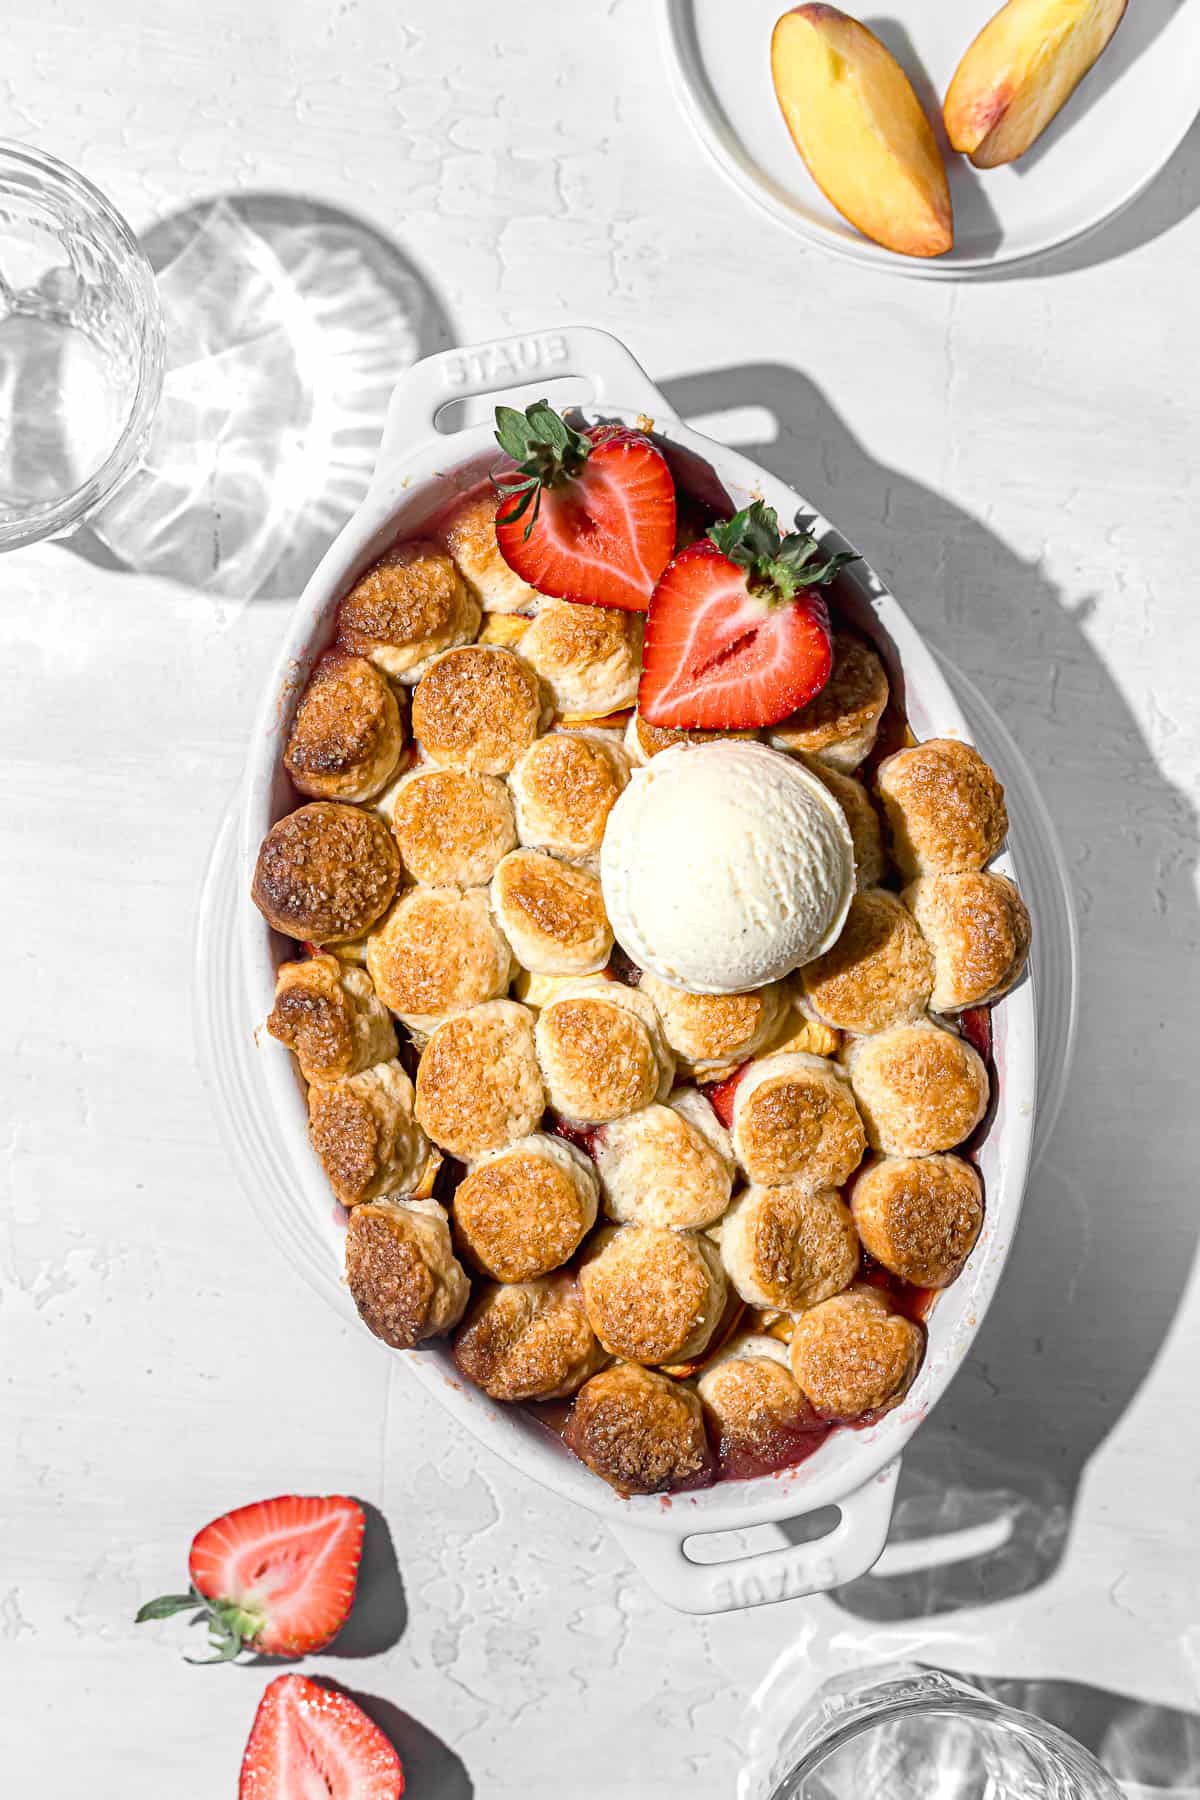 baked strawberry peach cobbler in oval dish topped with ice cream.